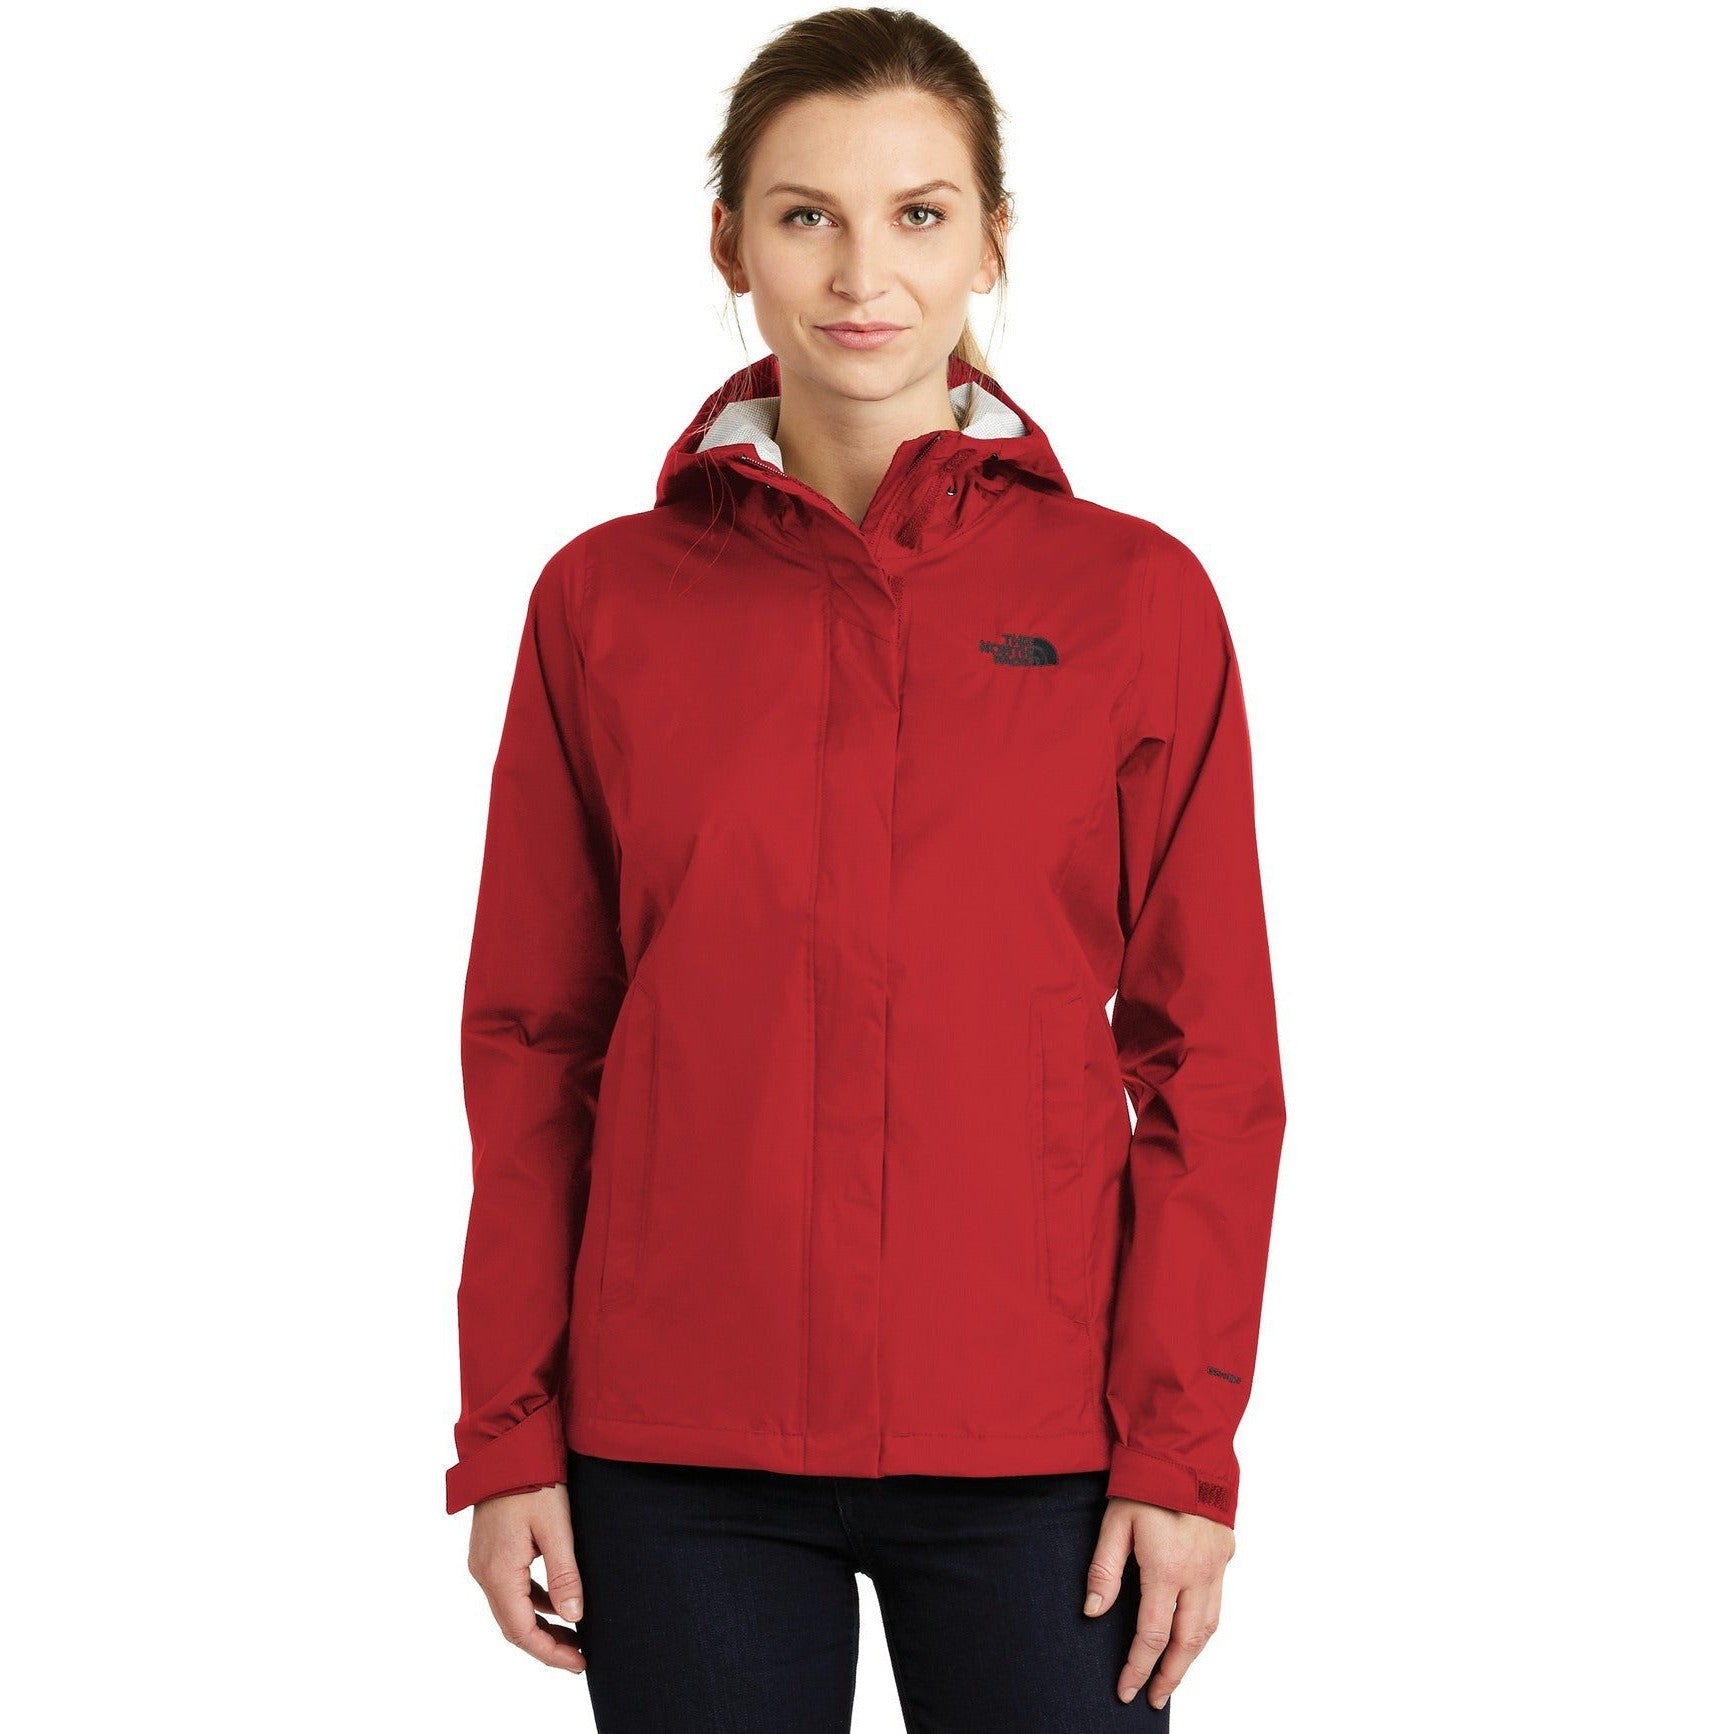 CLOSEOUT - The North Face Ladies DryVent Rain Jacket